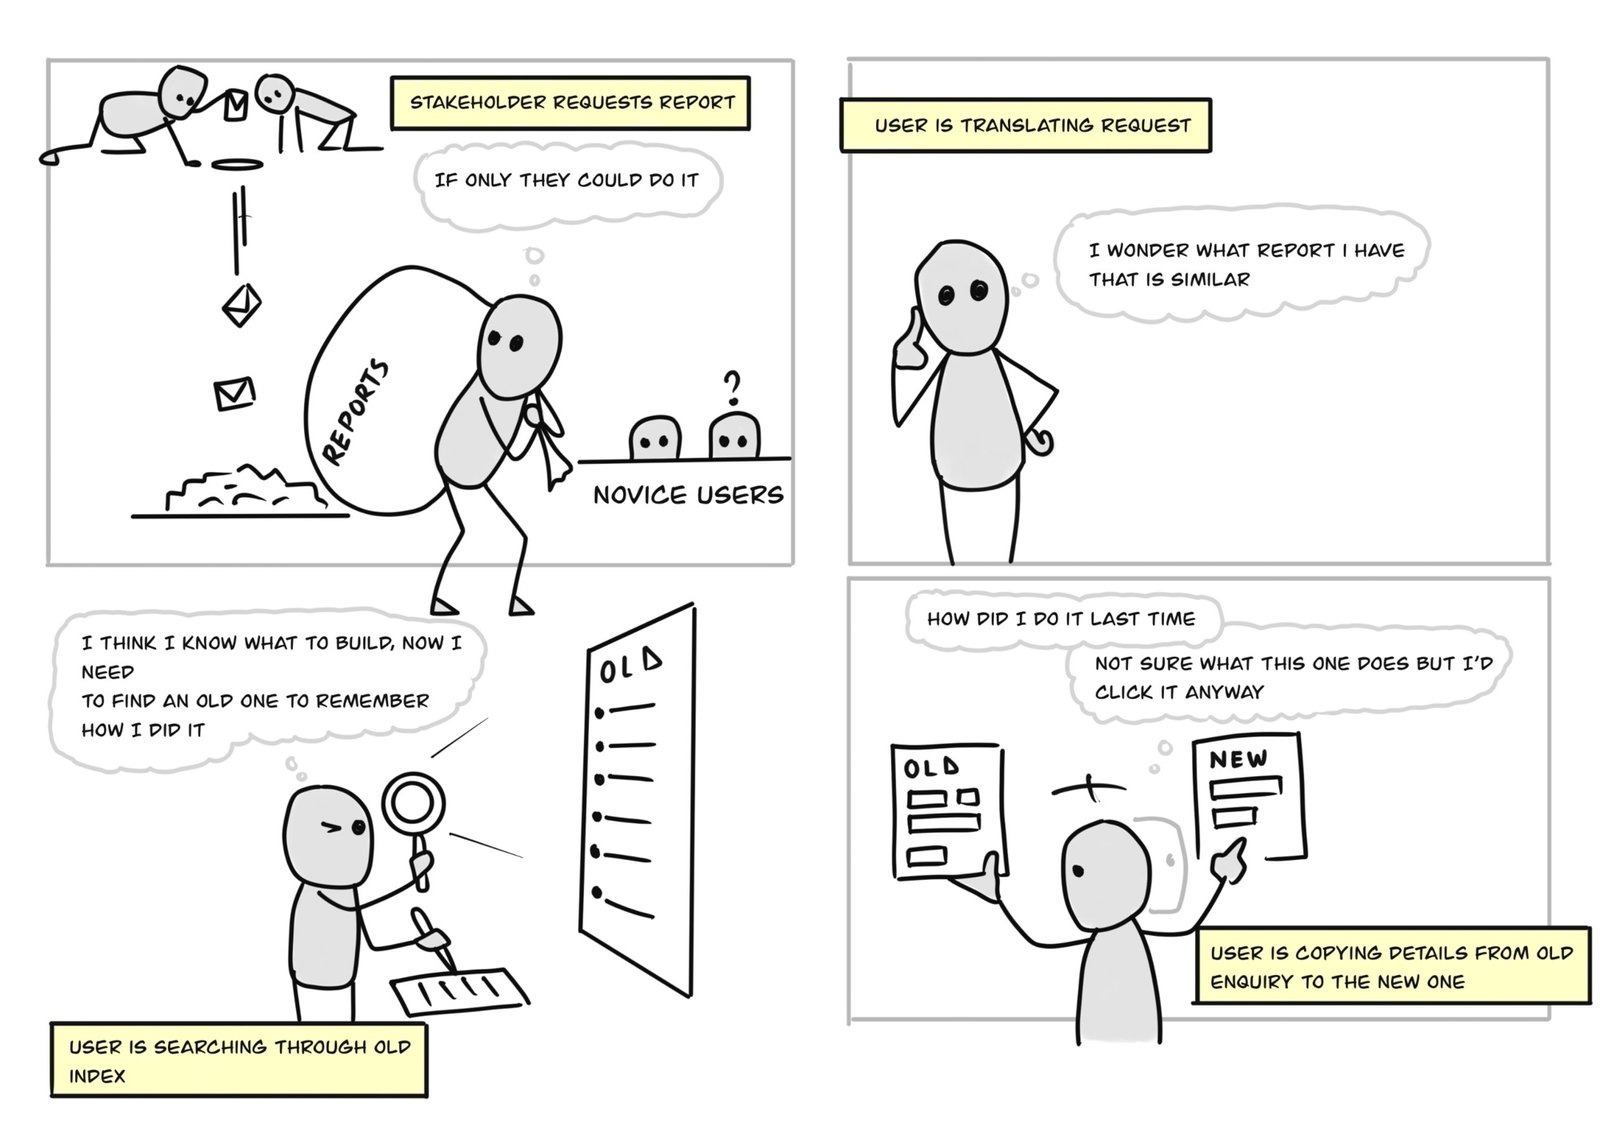 A storyboard of how the user went about creating reports in the cervical screening system.